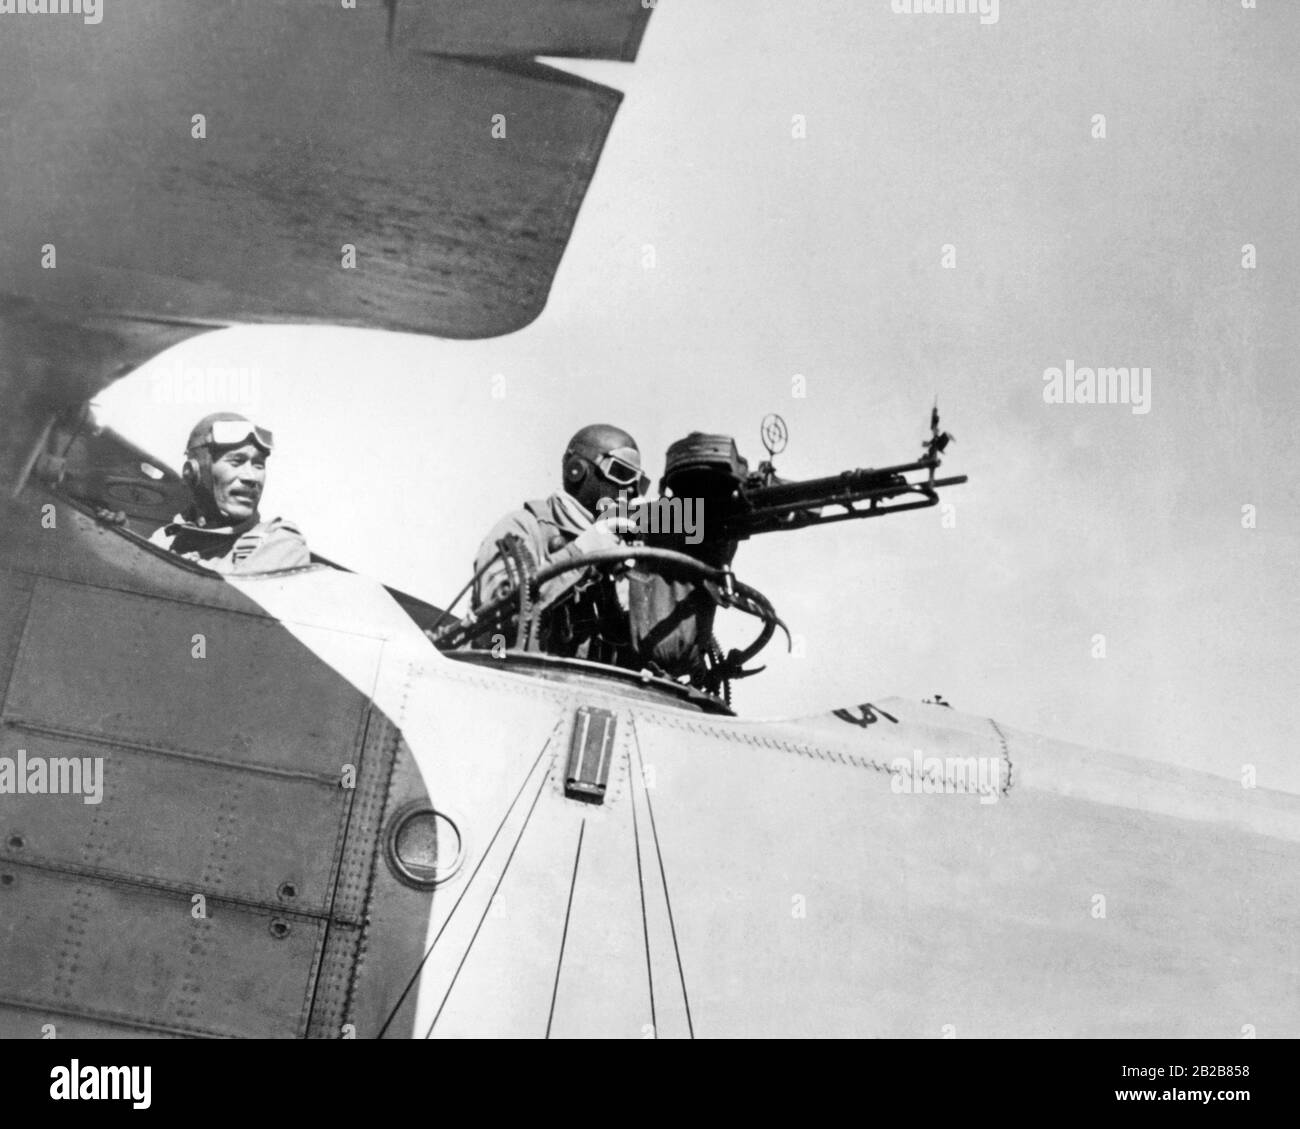 A Japanese bomber is in readiness on an airfield before an air attack on Chinese troops. The pilot turns to his gunner as he fires a volley from his machine gun. Stock Photo